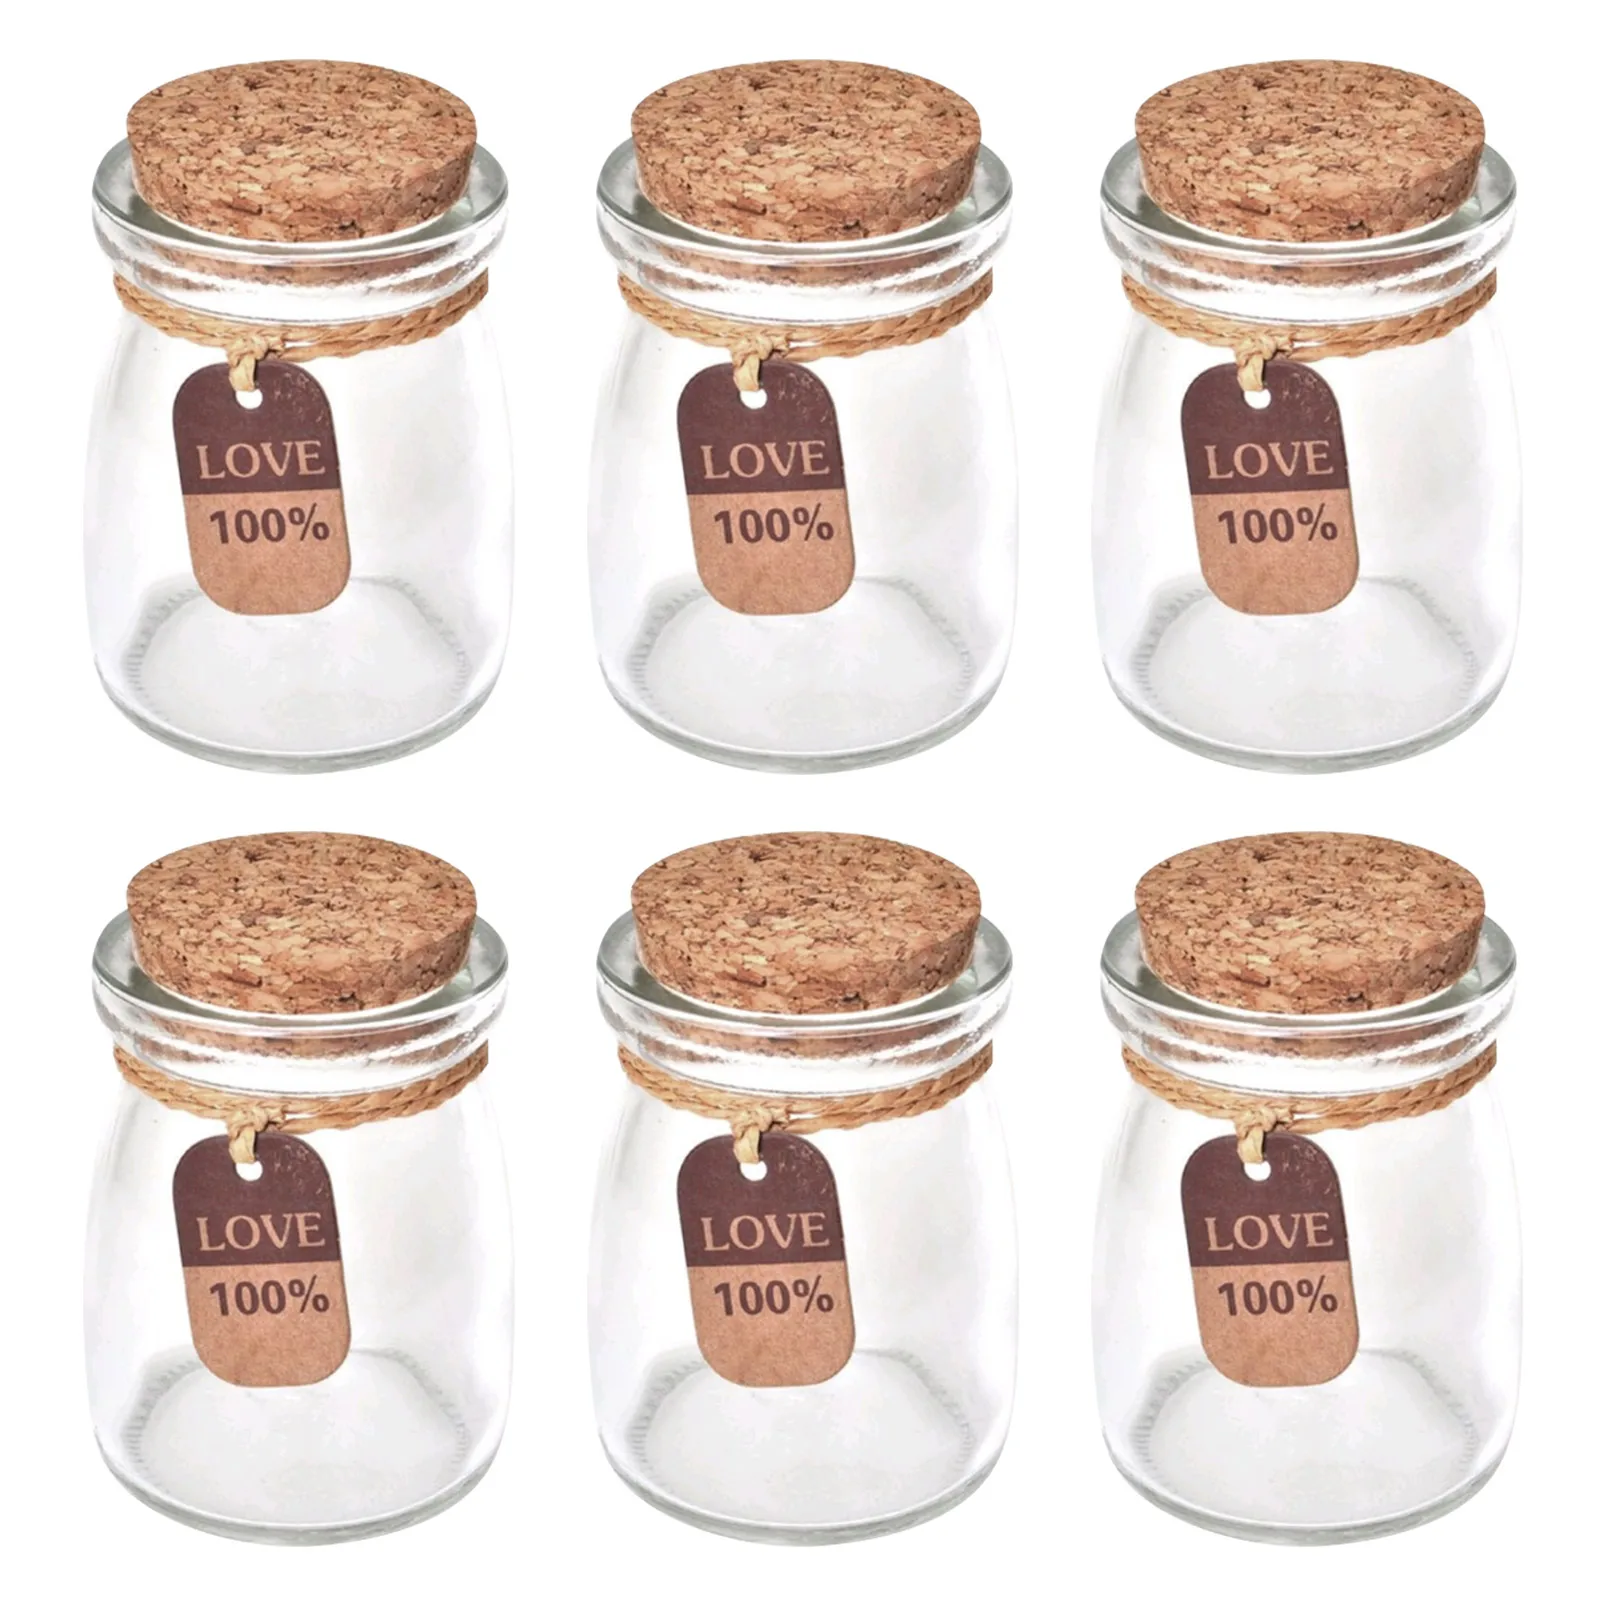 6PCS Mini Glass Yogurt Pudding Jars Containers with Cork Lids Labels Strings for Food Storage Wedding Party Favors Decorations